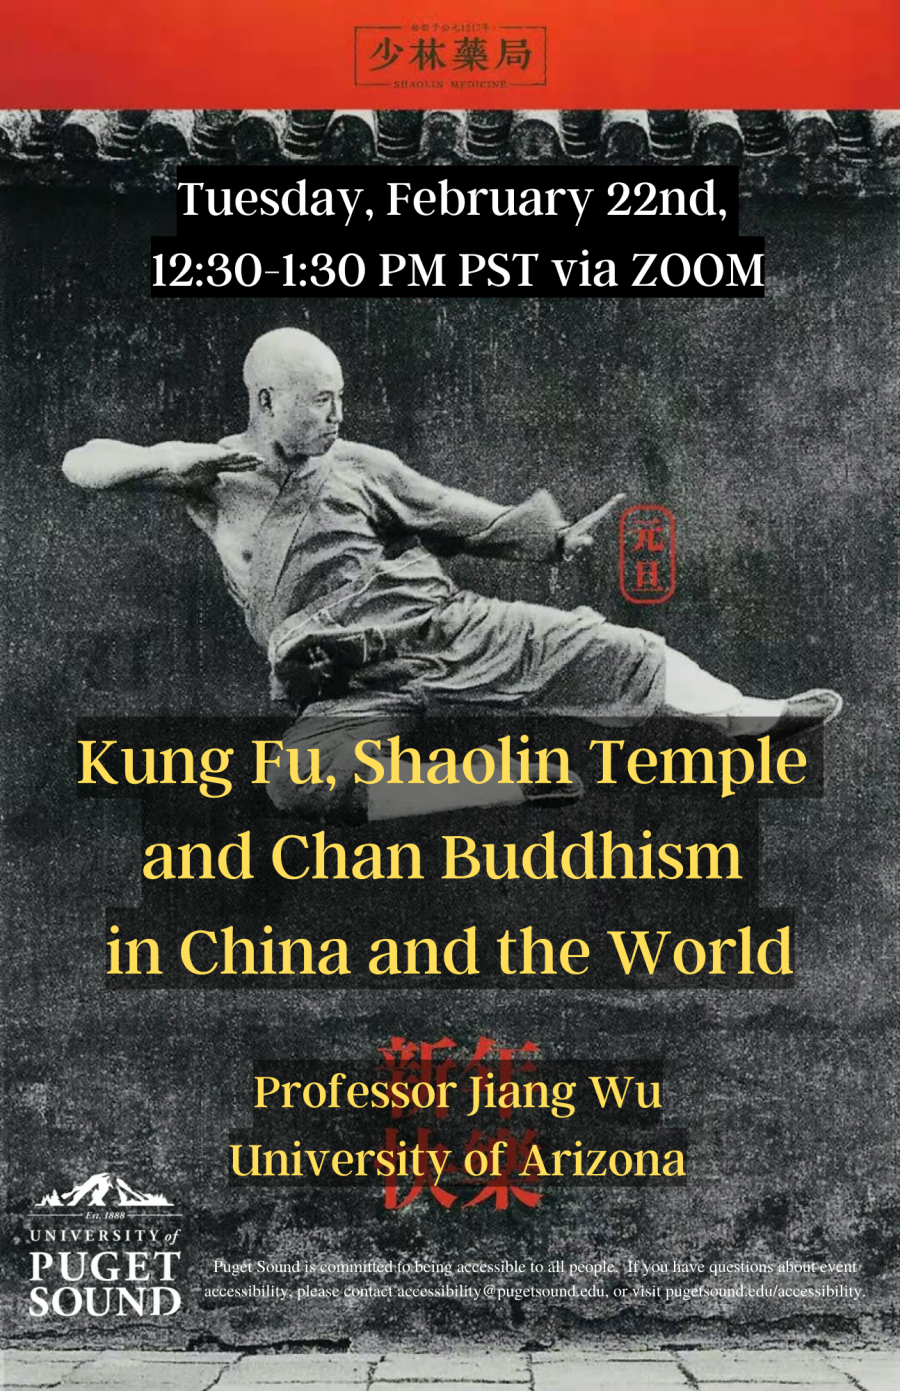 Kung Fu Shaolin Temple and Chan Buddhism in China and the World poster